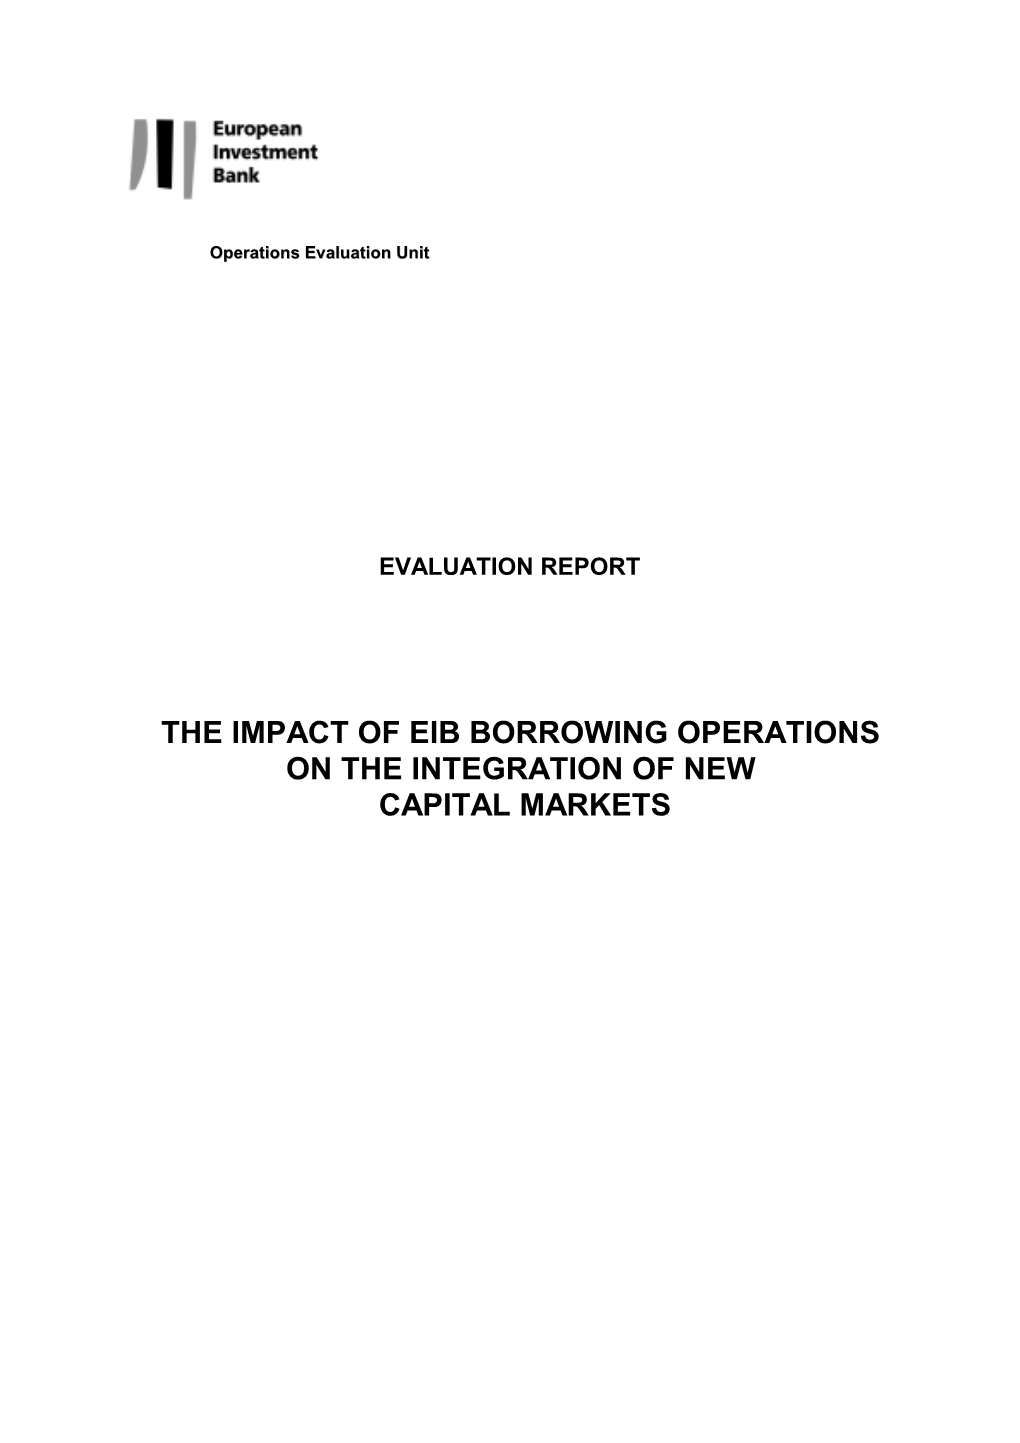 The Impact of Eib Borrowing Operations on the Integration of New Capital Markets